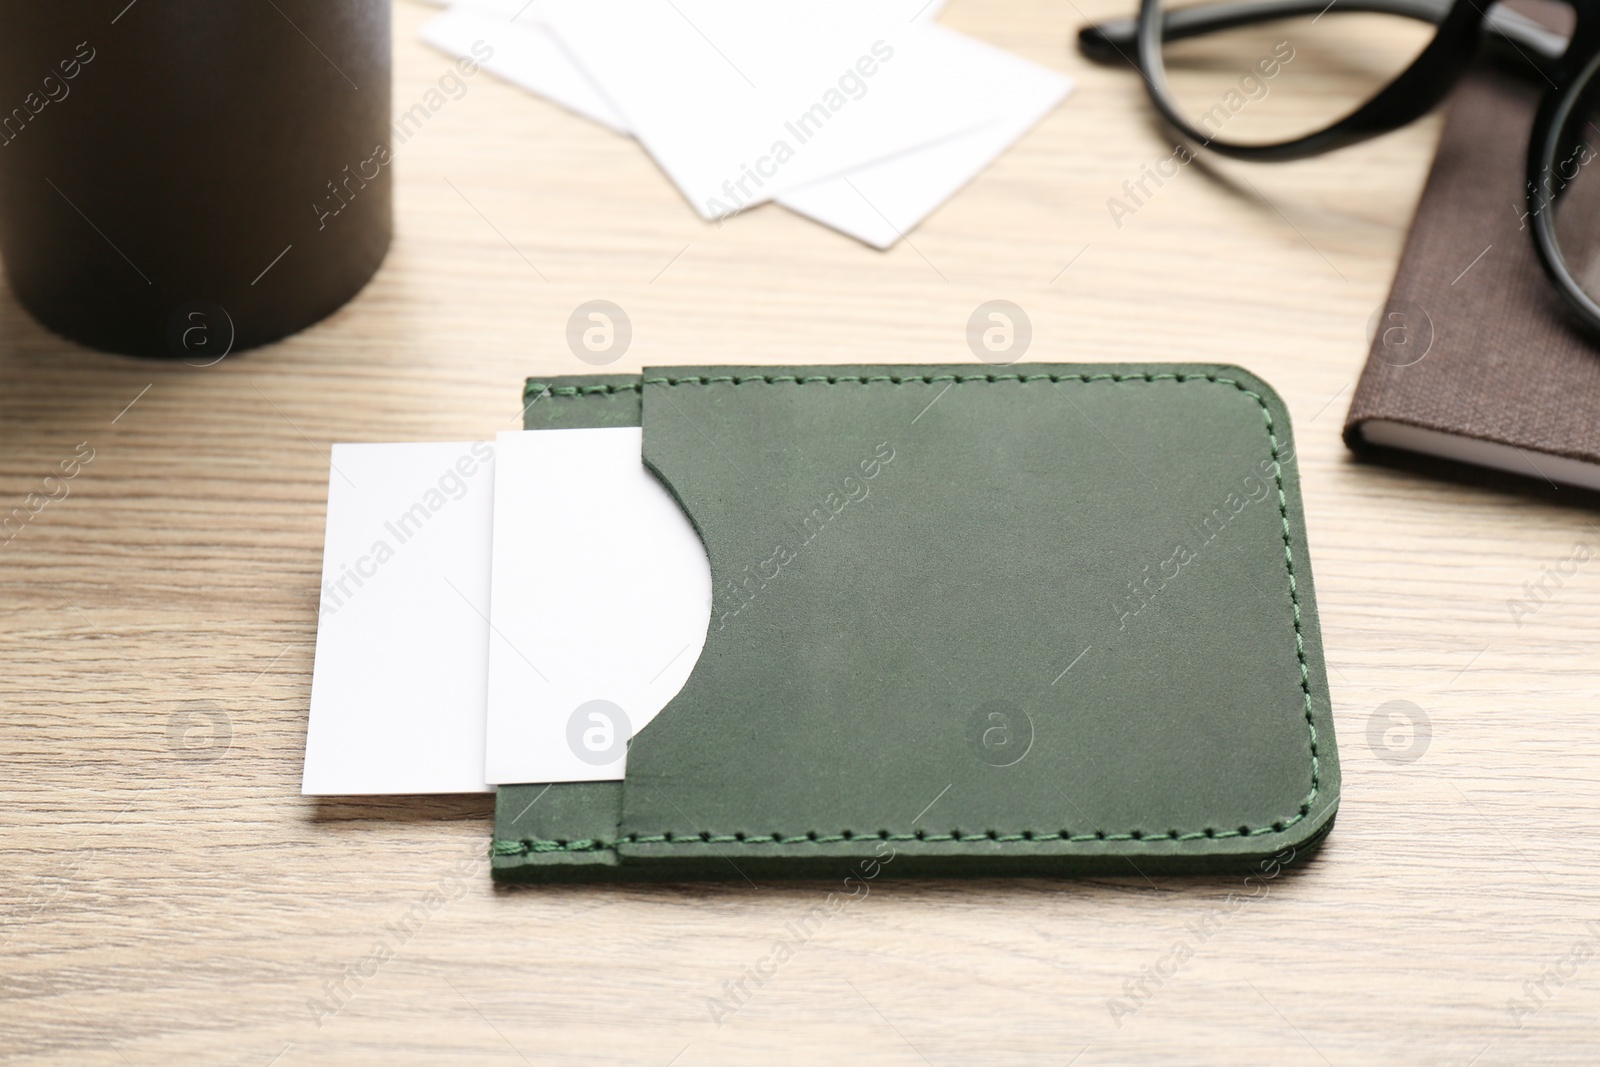 Photo of Leather business card holder with cards on wooden table